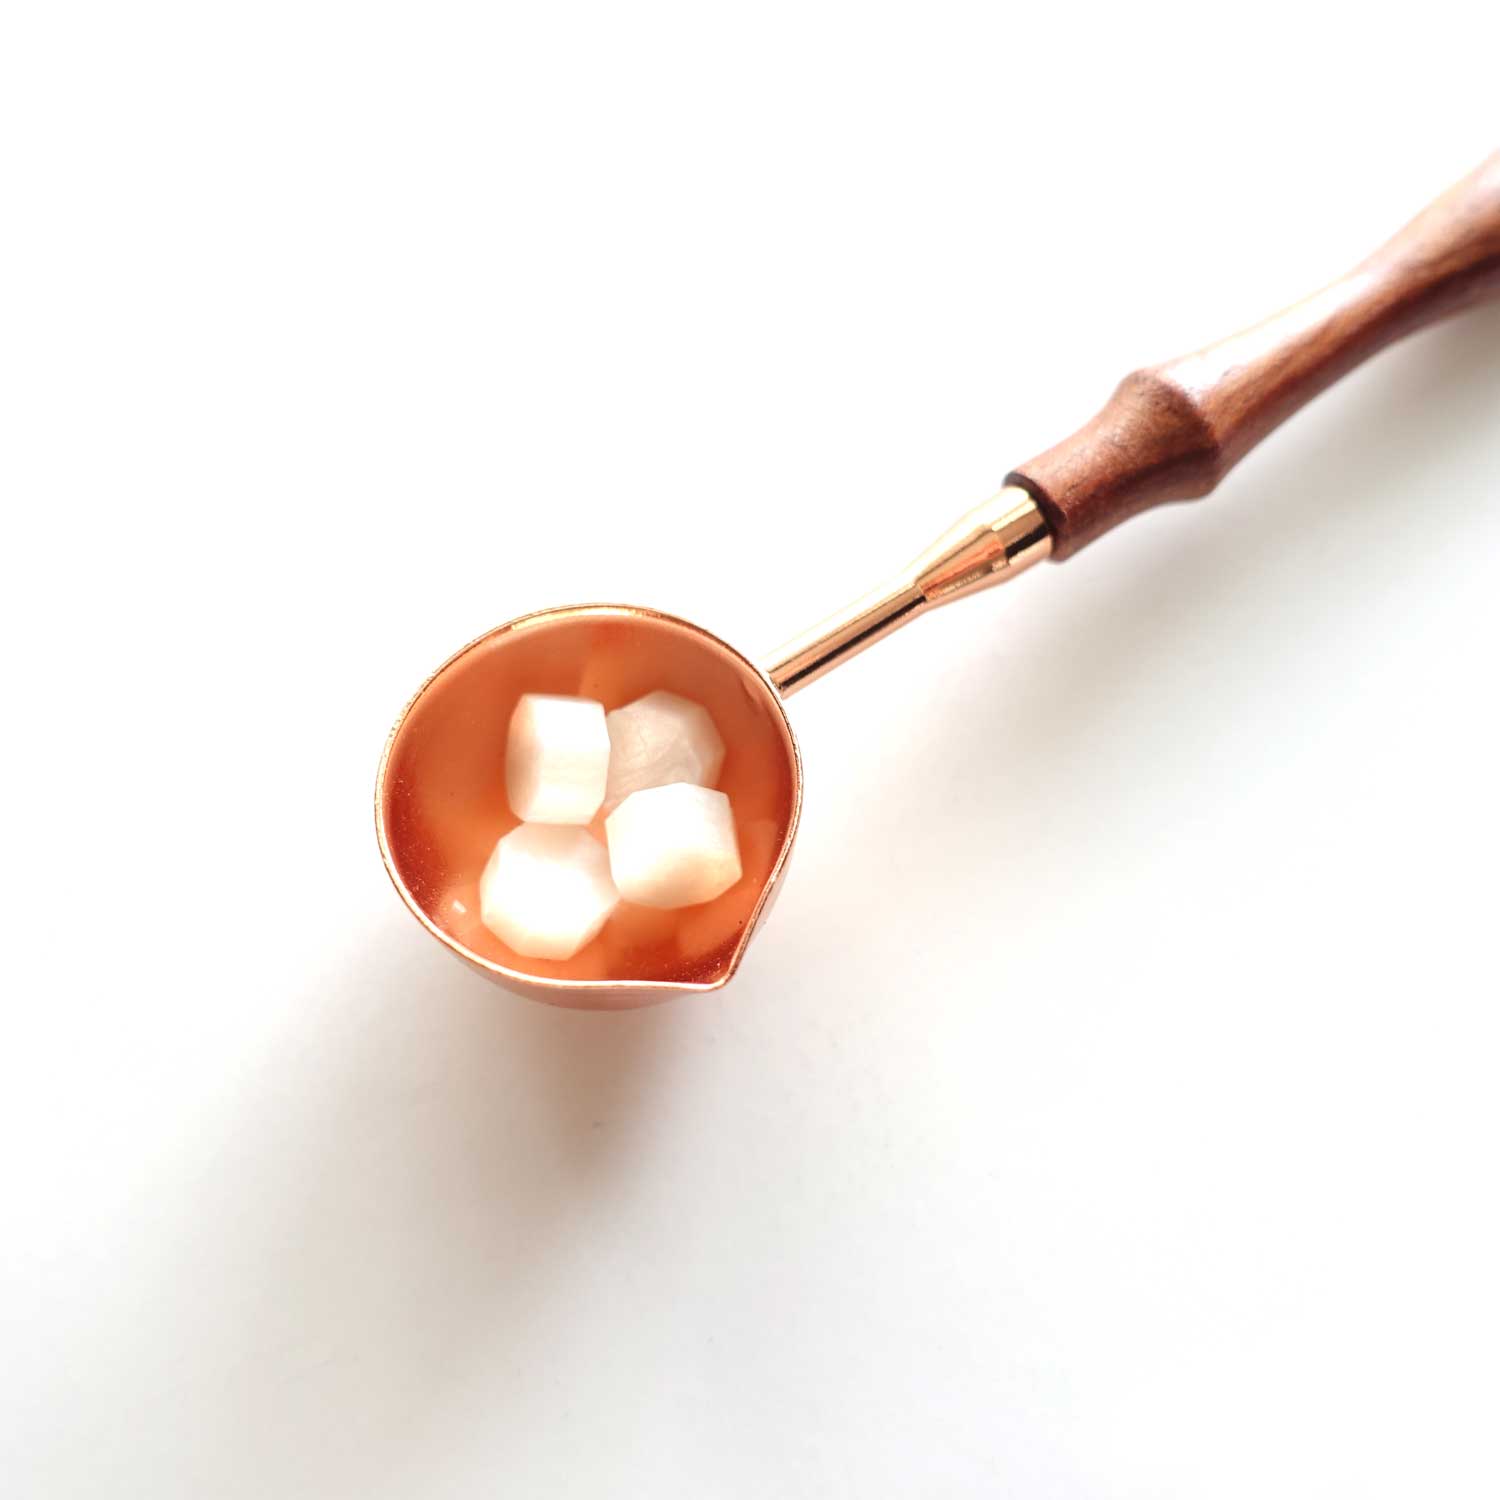 Wax seal melting spoon rose gold spouted australia